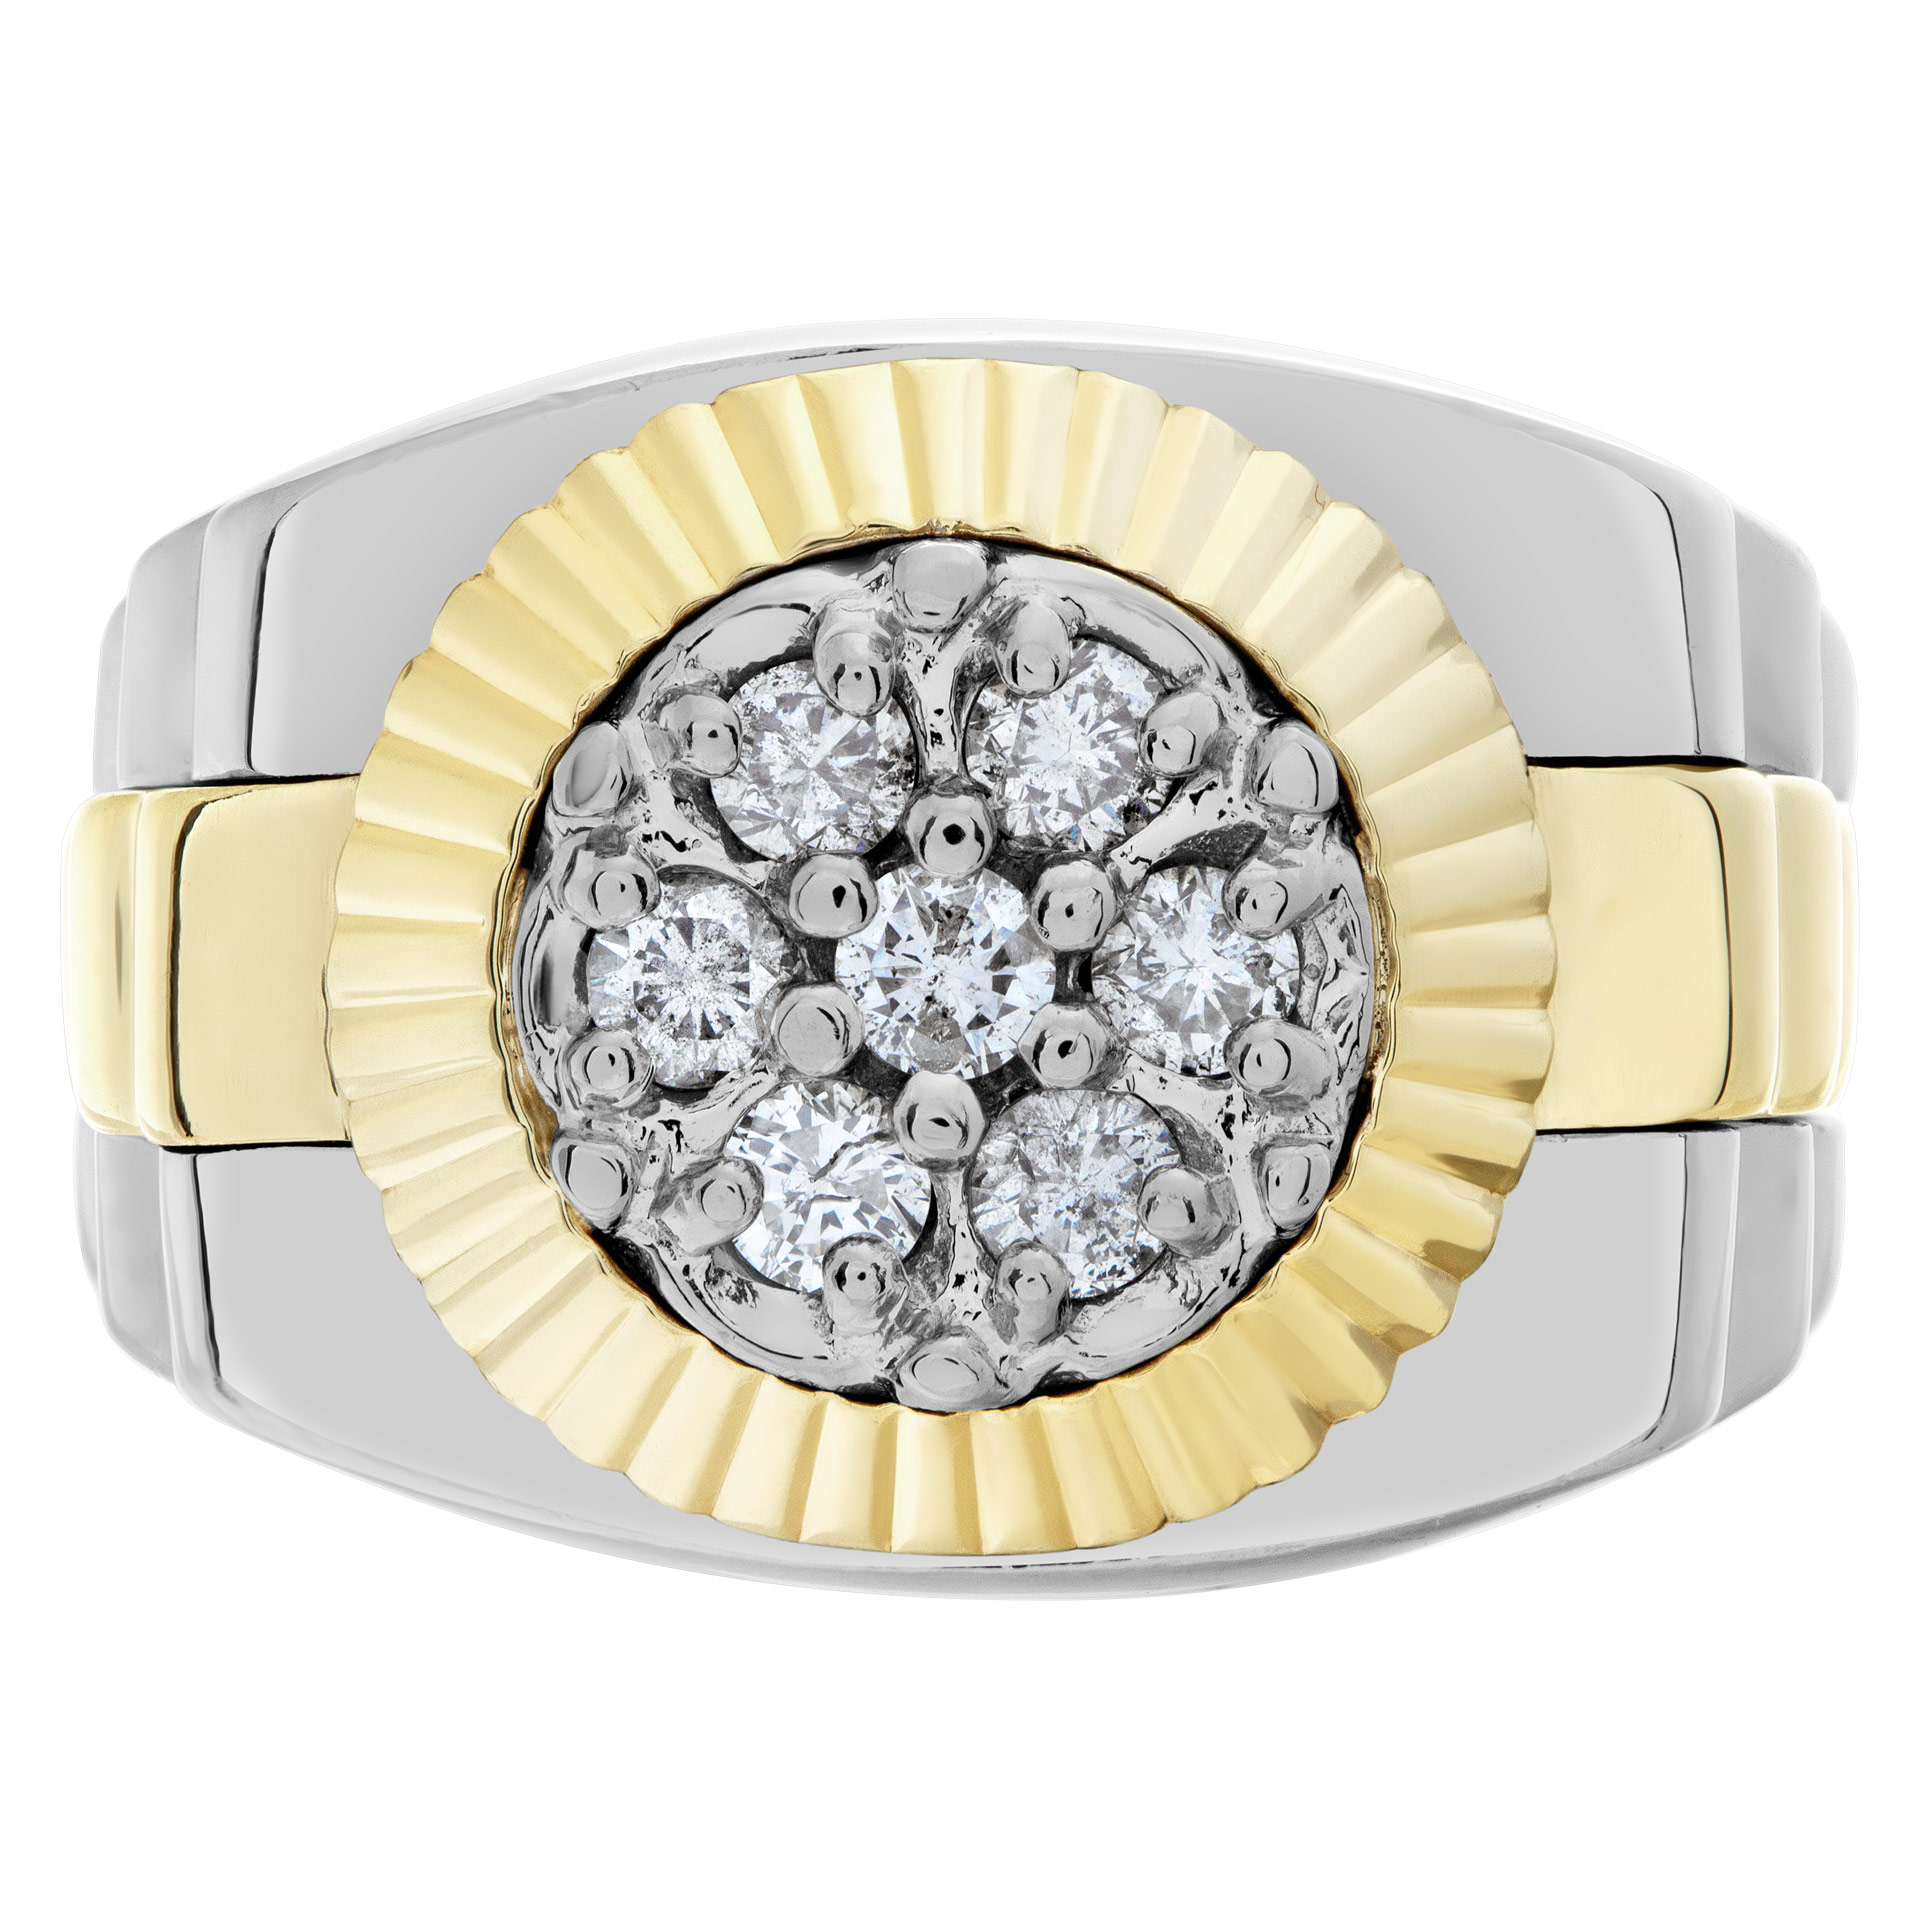 President style diamond ring in 14k white and yellow gold. image 2